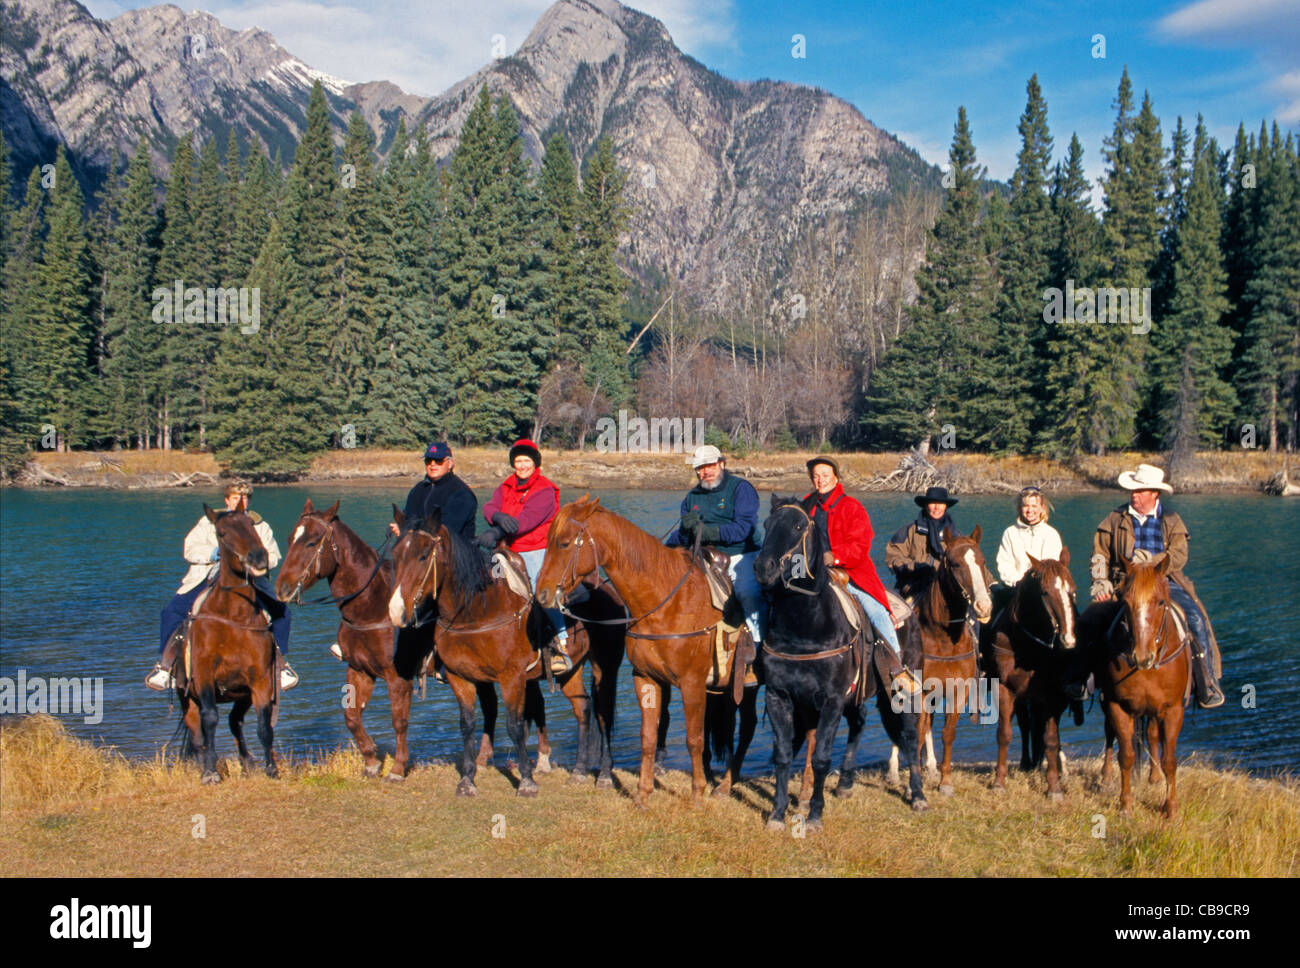 Horseback riders on a vacation trip pause by the Bow River during a trail ride in Banff National Park in the Canadian Rockies in Alberta, Canada. Stock Photo